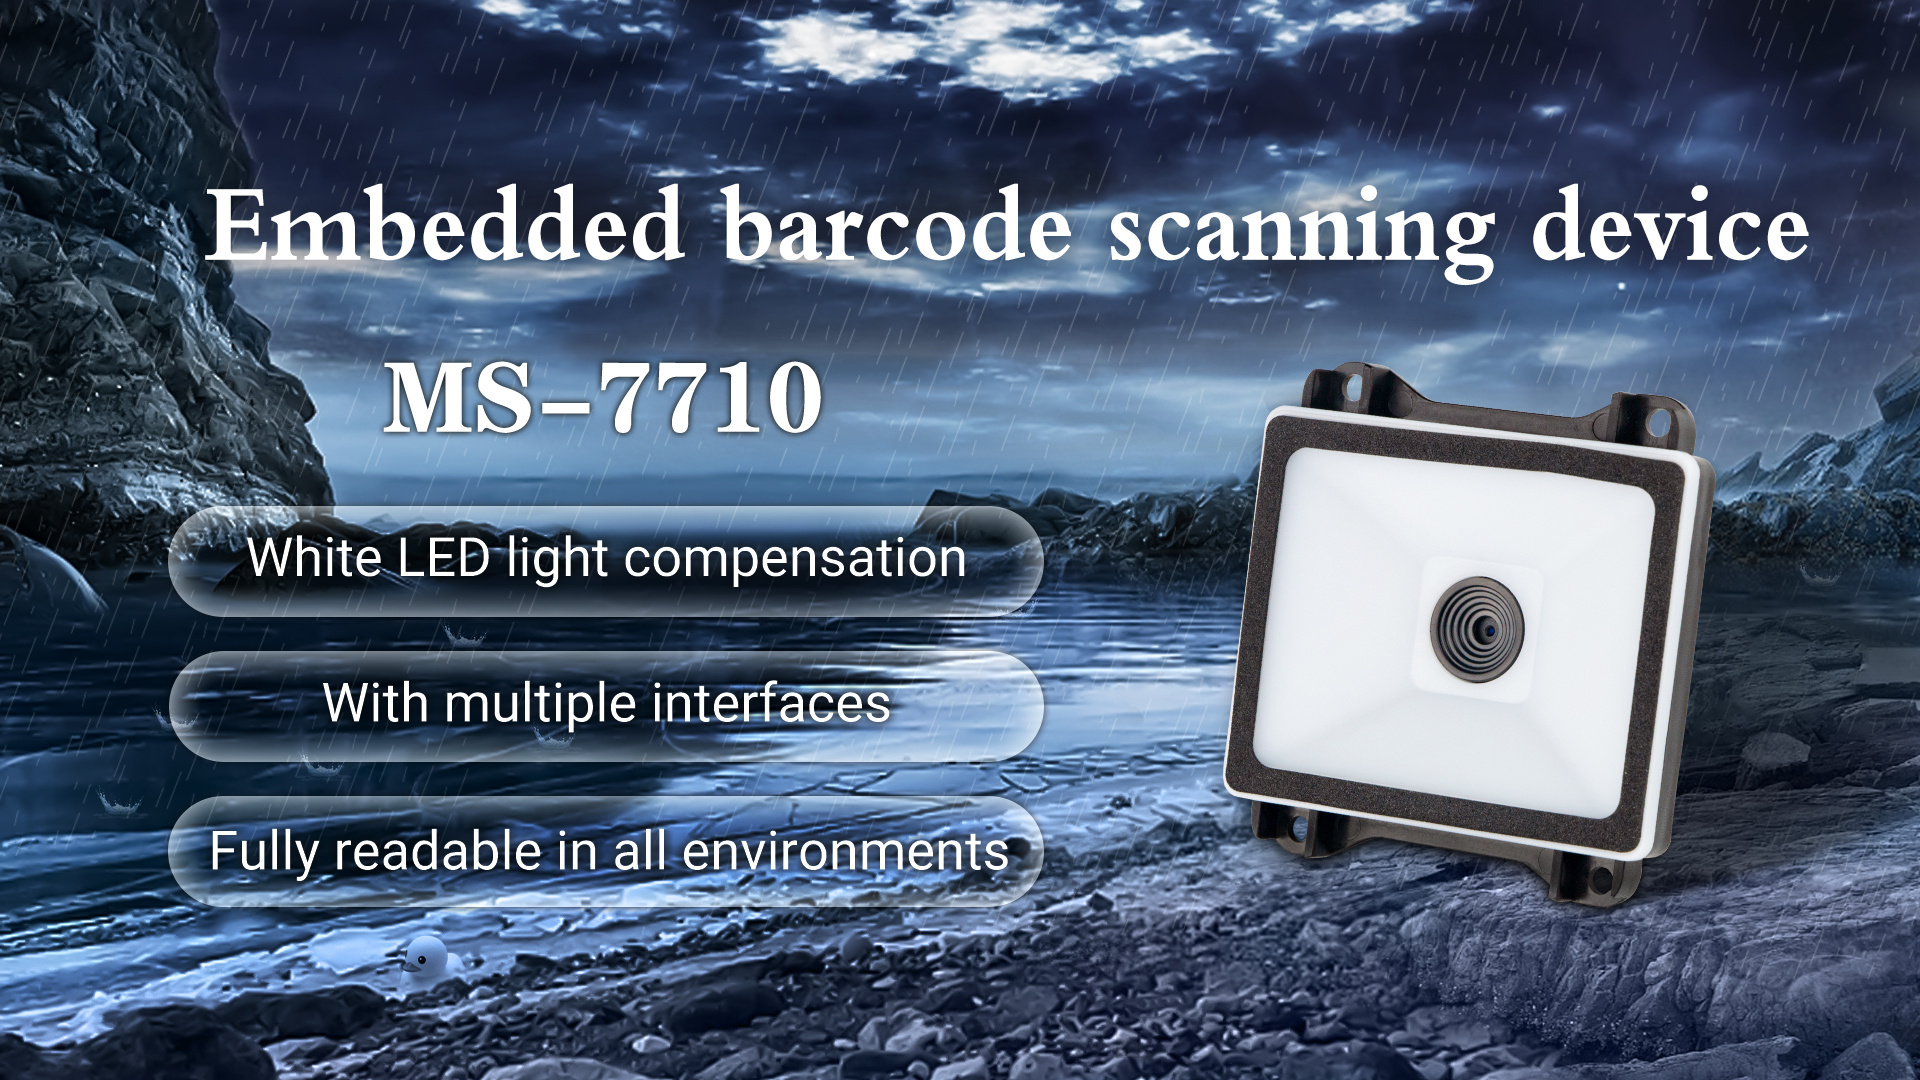 MASUNG  scanner MS-7710 provides solutions for catering self-service ordering machines